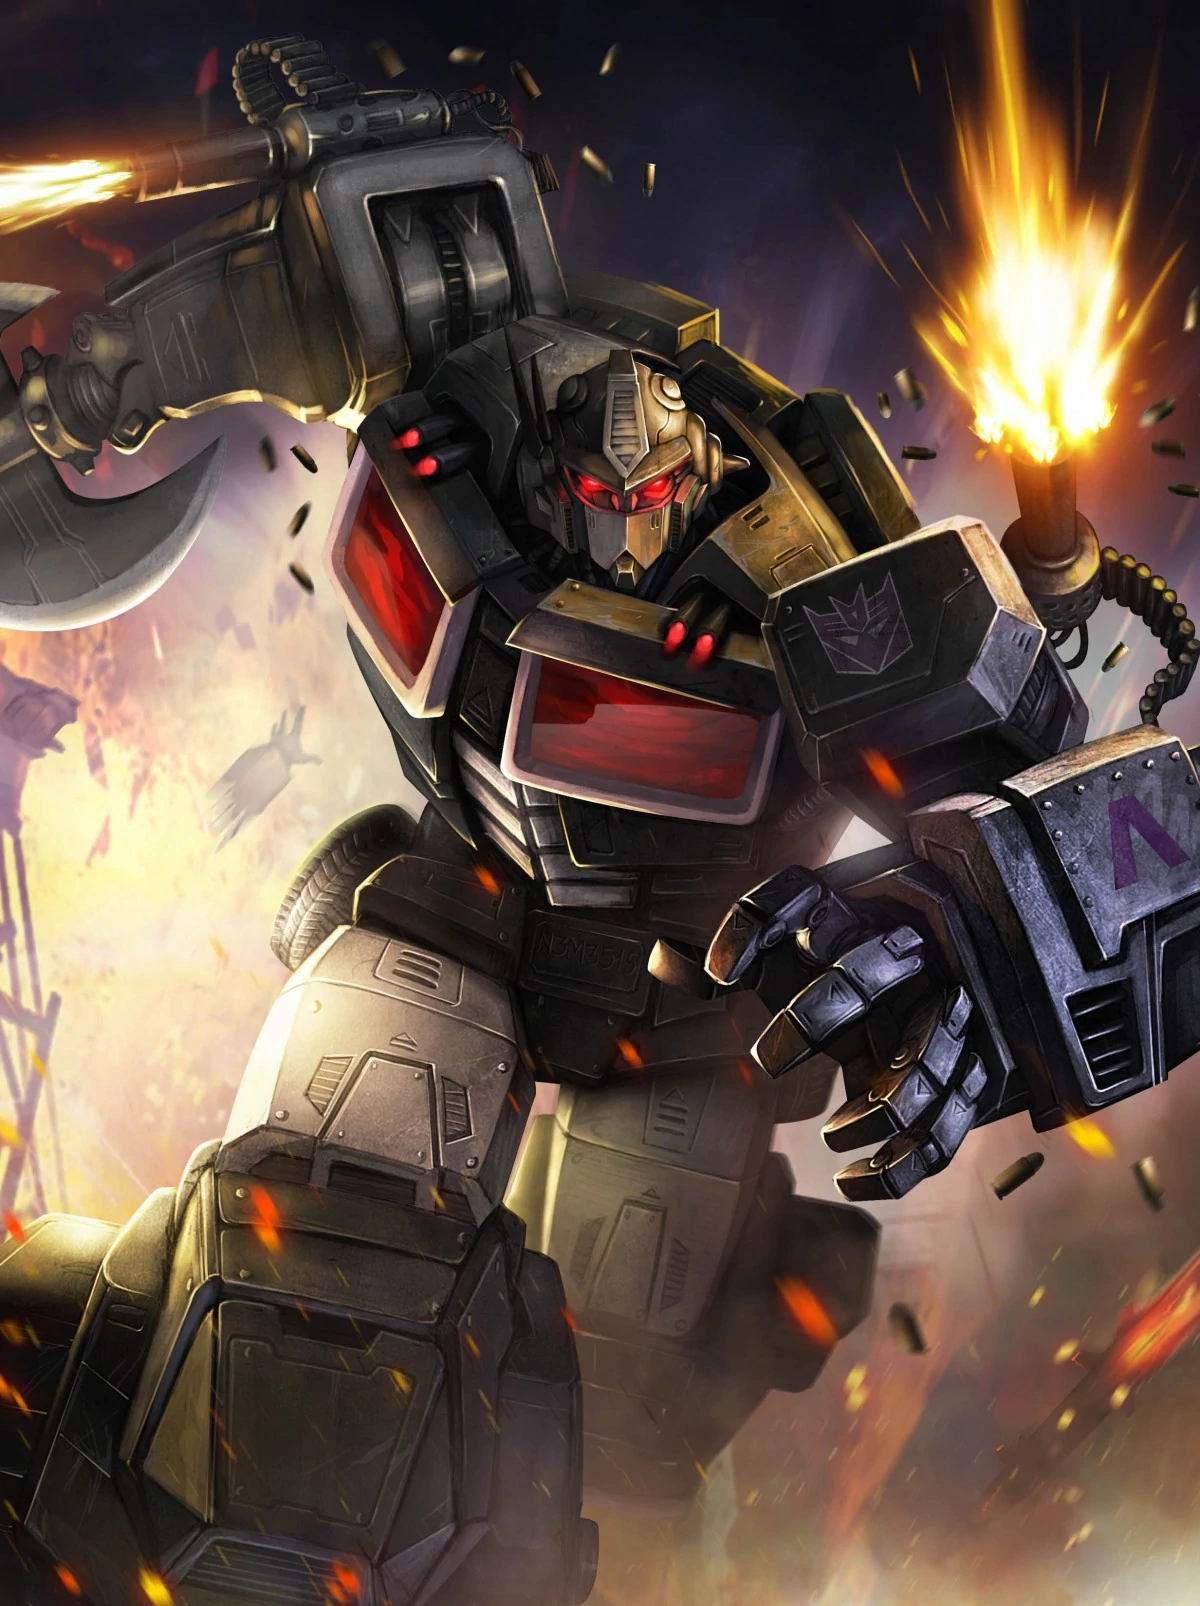 Nemesis Prime and how he came to be!